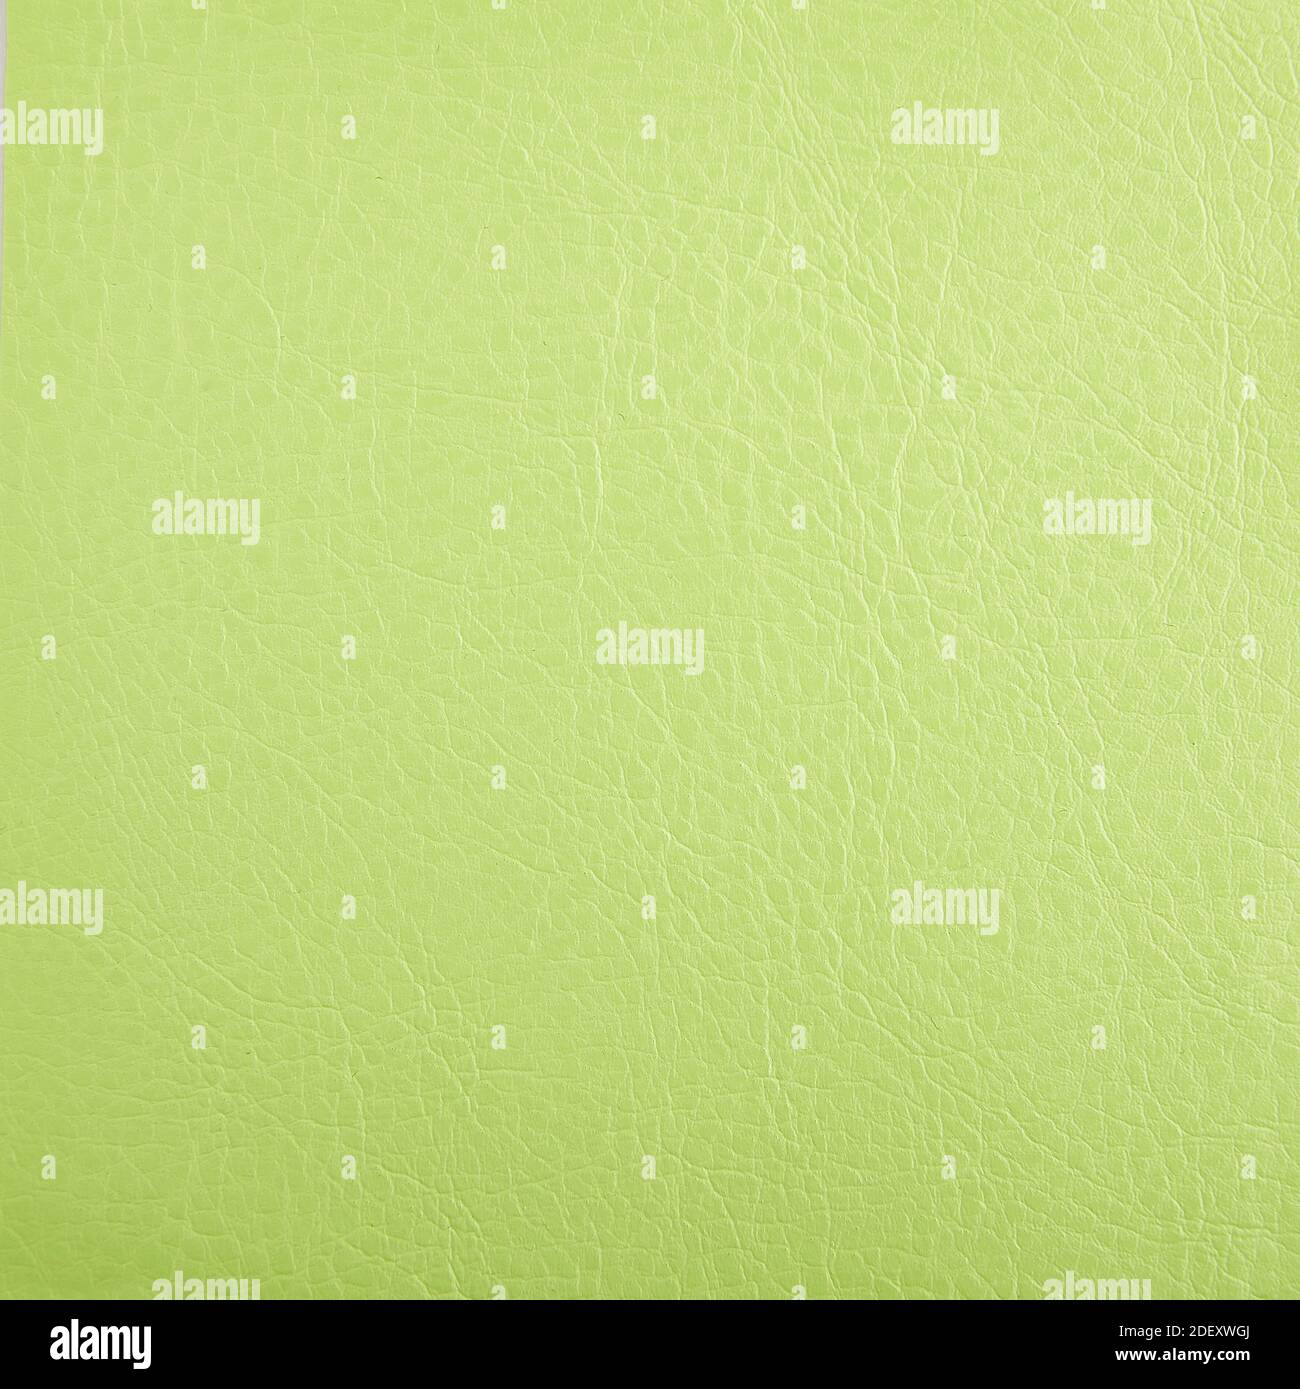 Premium light green leather texture background for decor Stock Photo